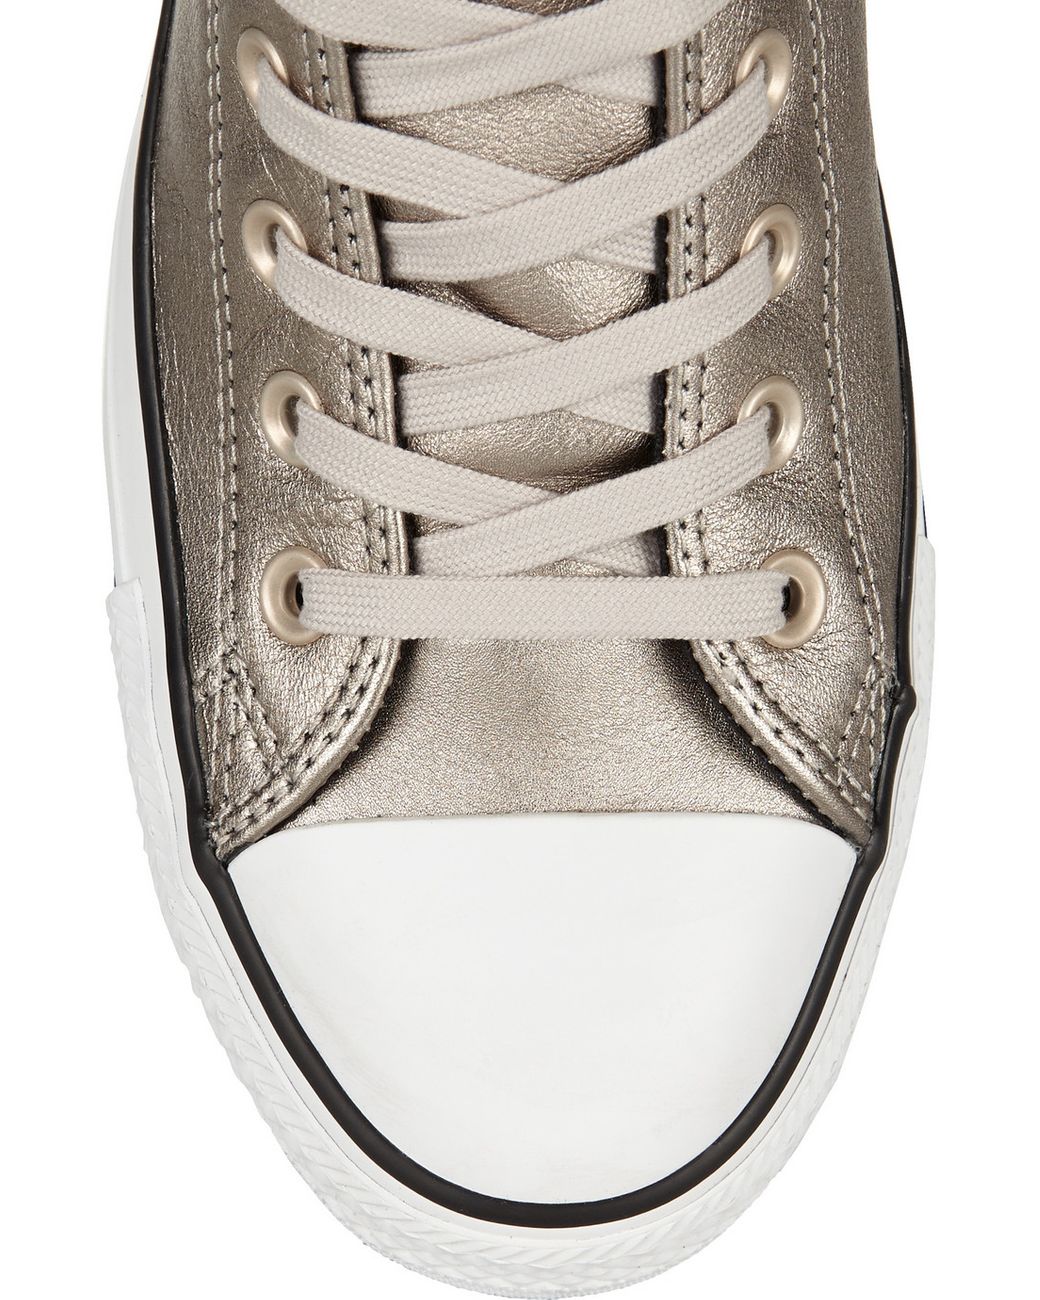 Converse Chuck Taylor All Star Tri Zip Leather High-Top Sneakers in  Metallic | Lyst